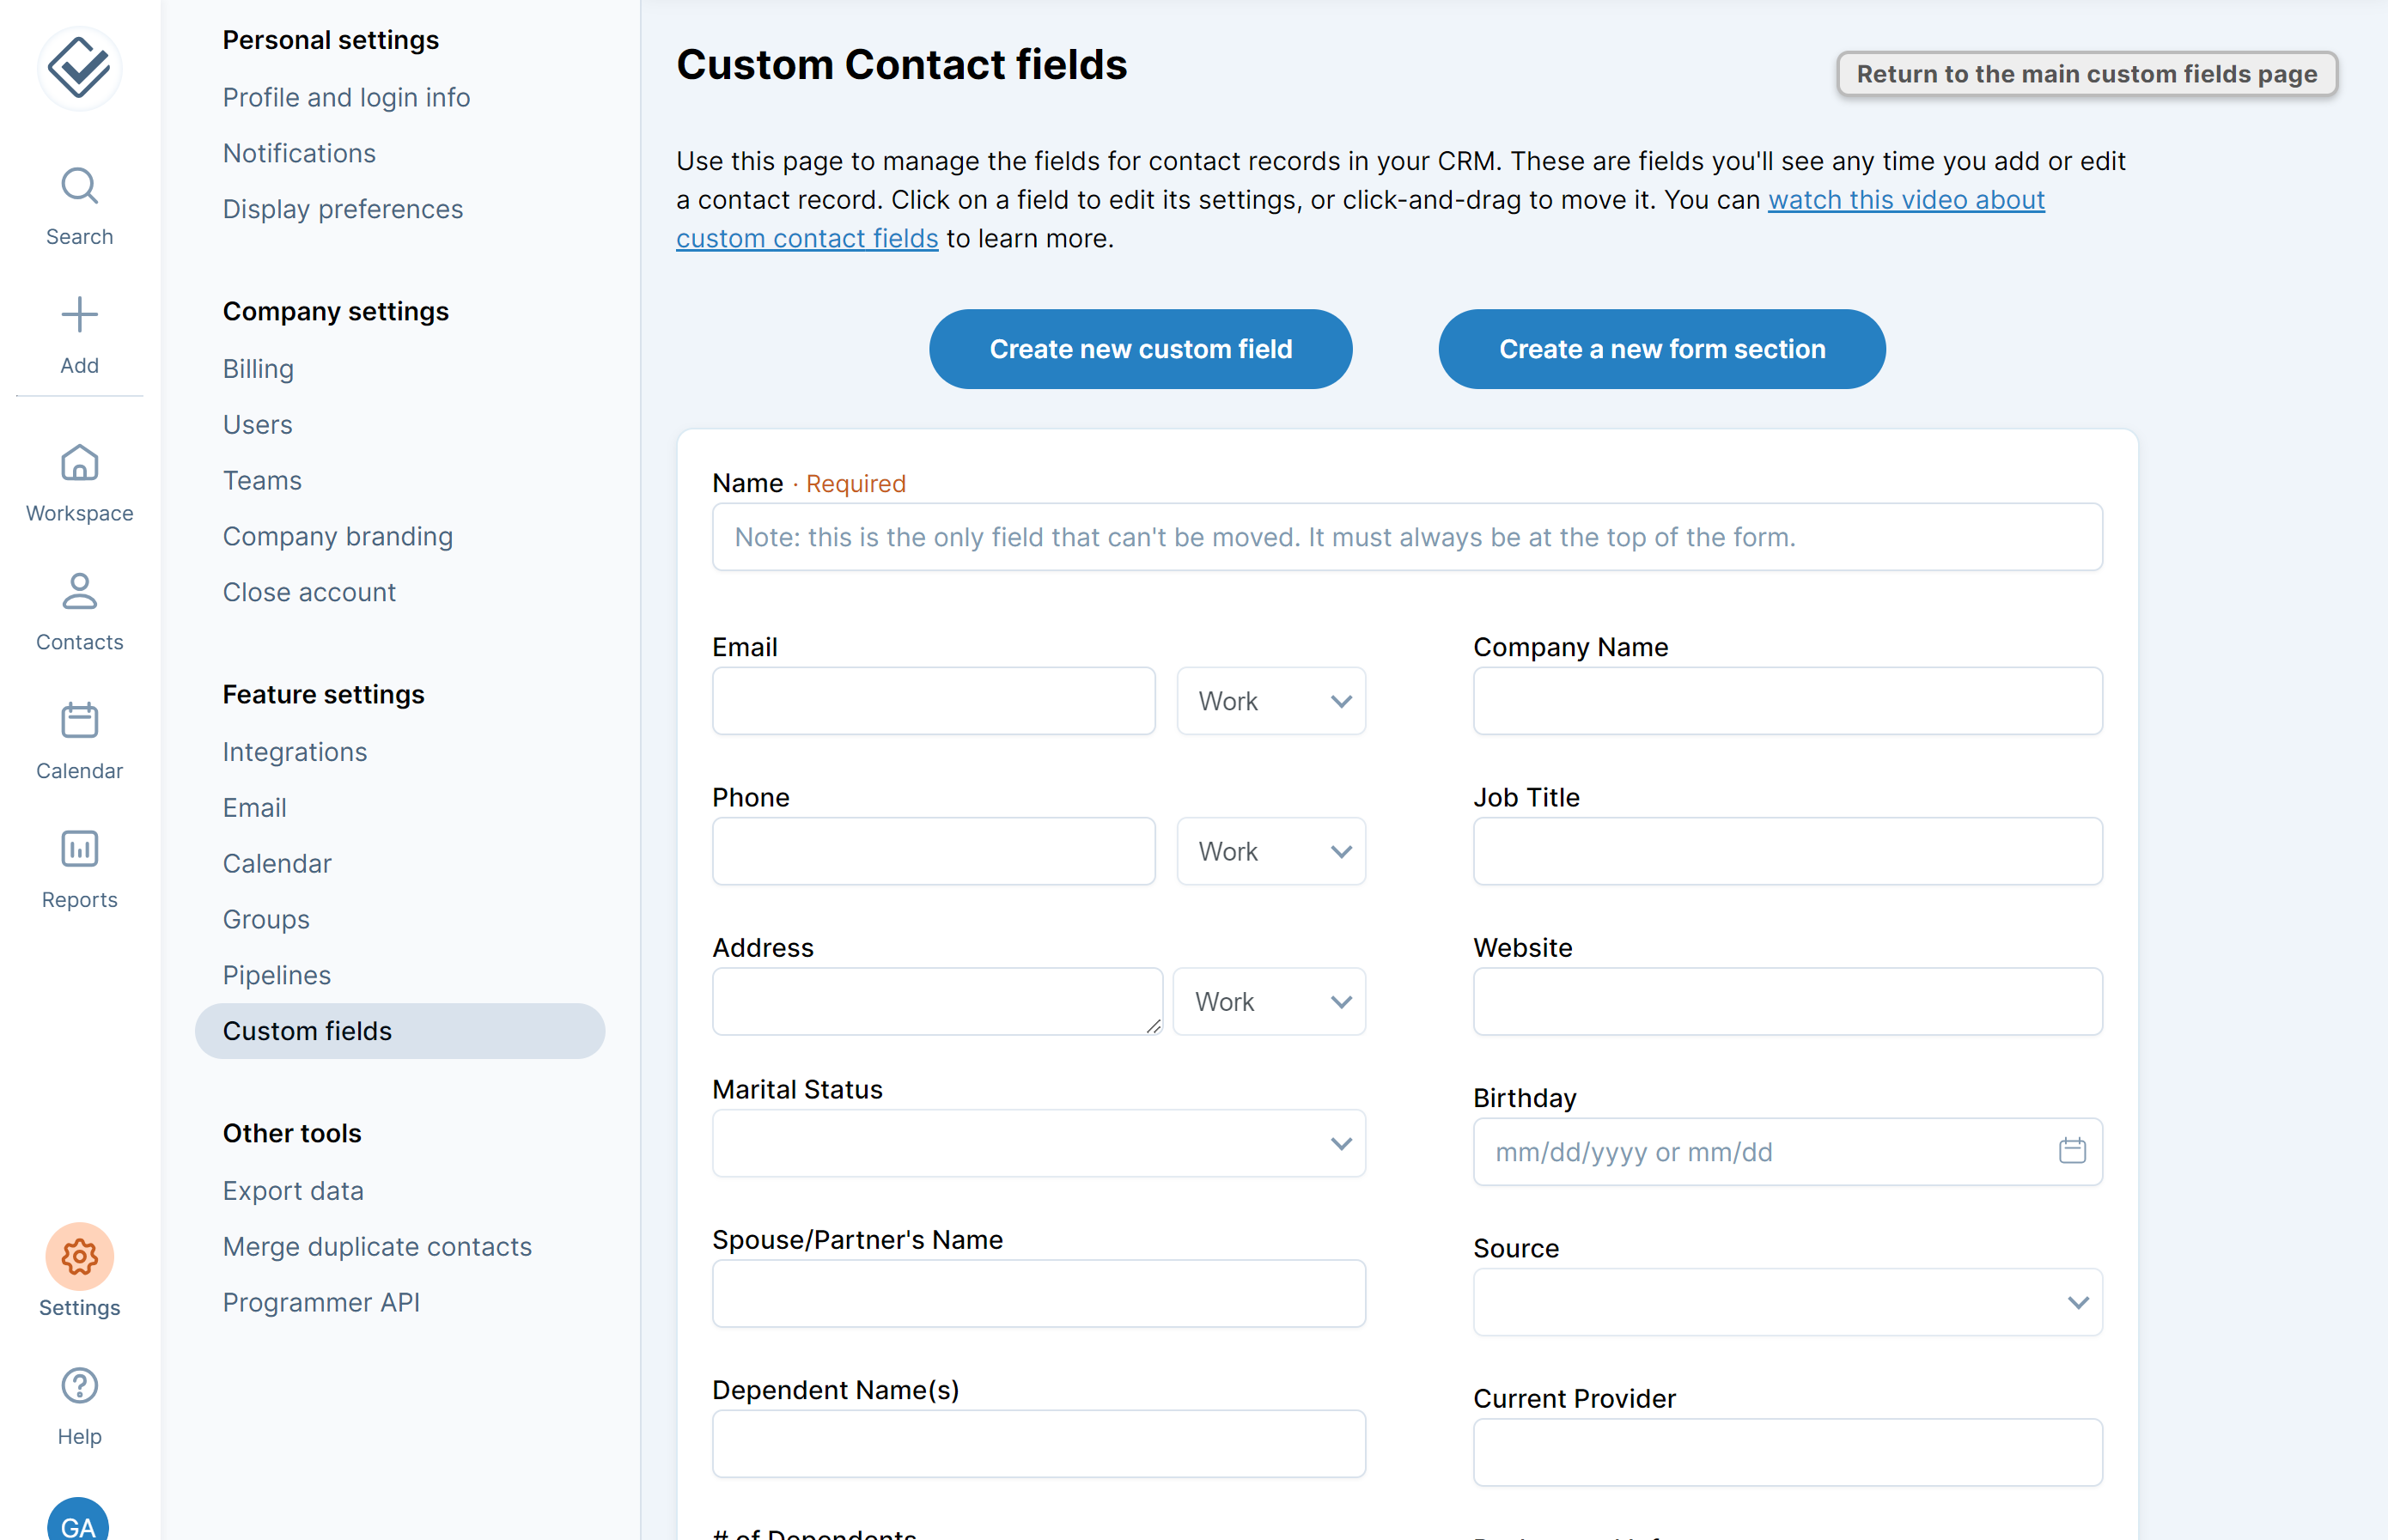 Custom fields - create unlimited custom fields to store all the information you need to stay on top of for every contact or company.